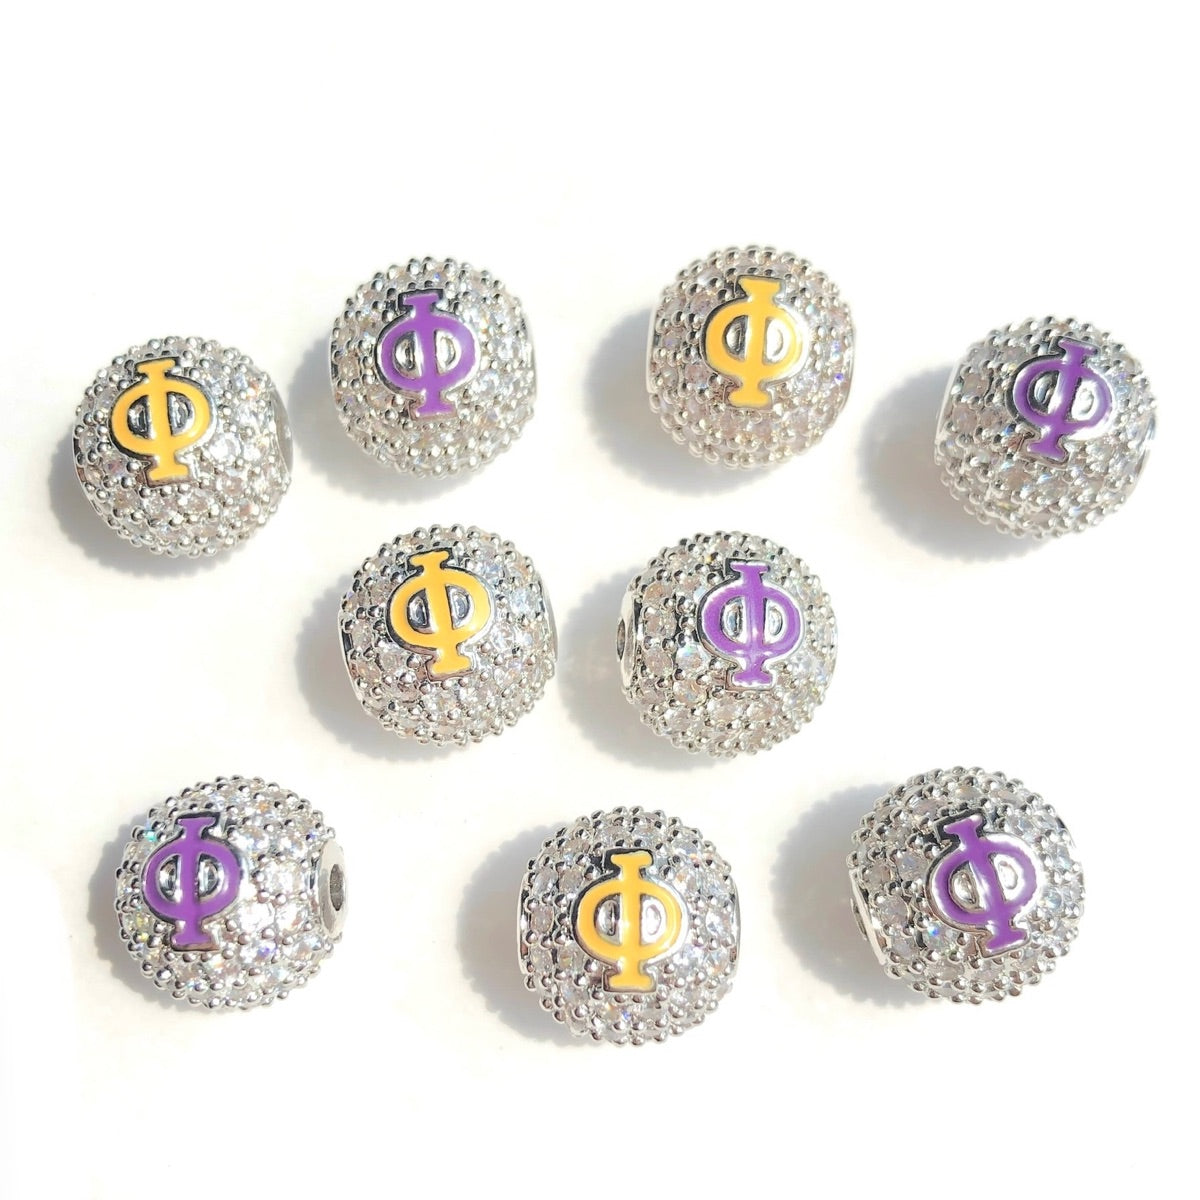 12pcs/lot 10mm Purple Yellow Enamel CZ Paved Greek Letter "Ψ", "Φ", "Ω" Ball Spacers Beads 12 Silver Φ CZ Paved Spacers 10mm Beads Ball Beads Greek Letters New Spacers Arrivals Charms Beads Beyond